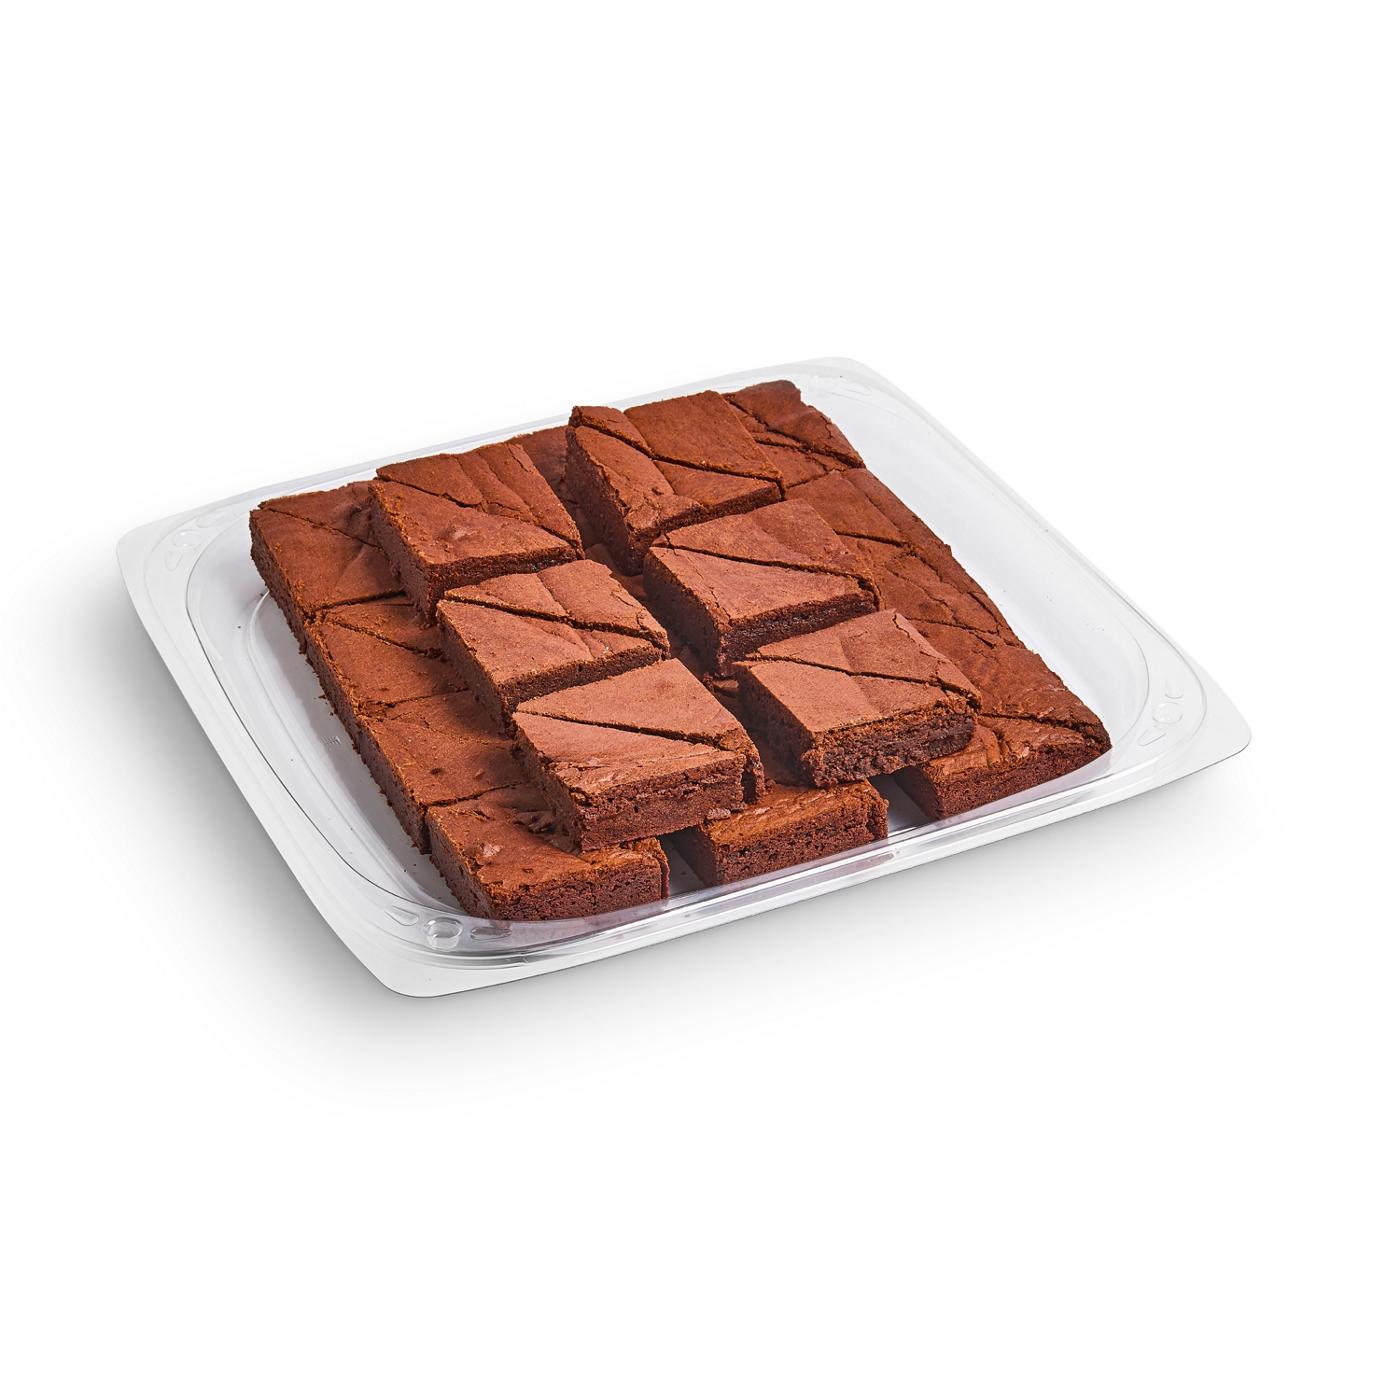 H-E-B Bakery Large Party Tray - Uniced Gourmet Brownies; image 3 of 3